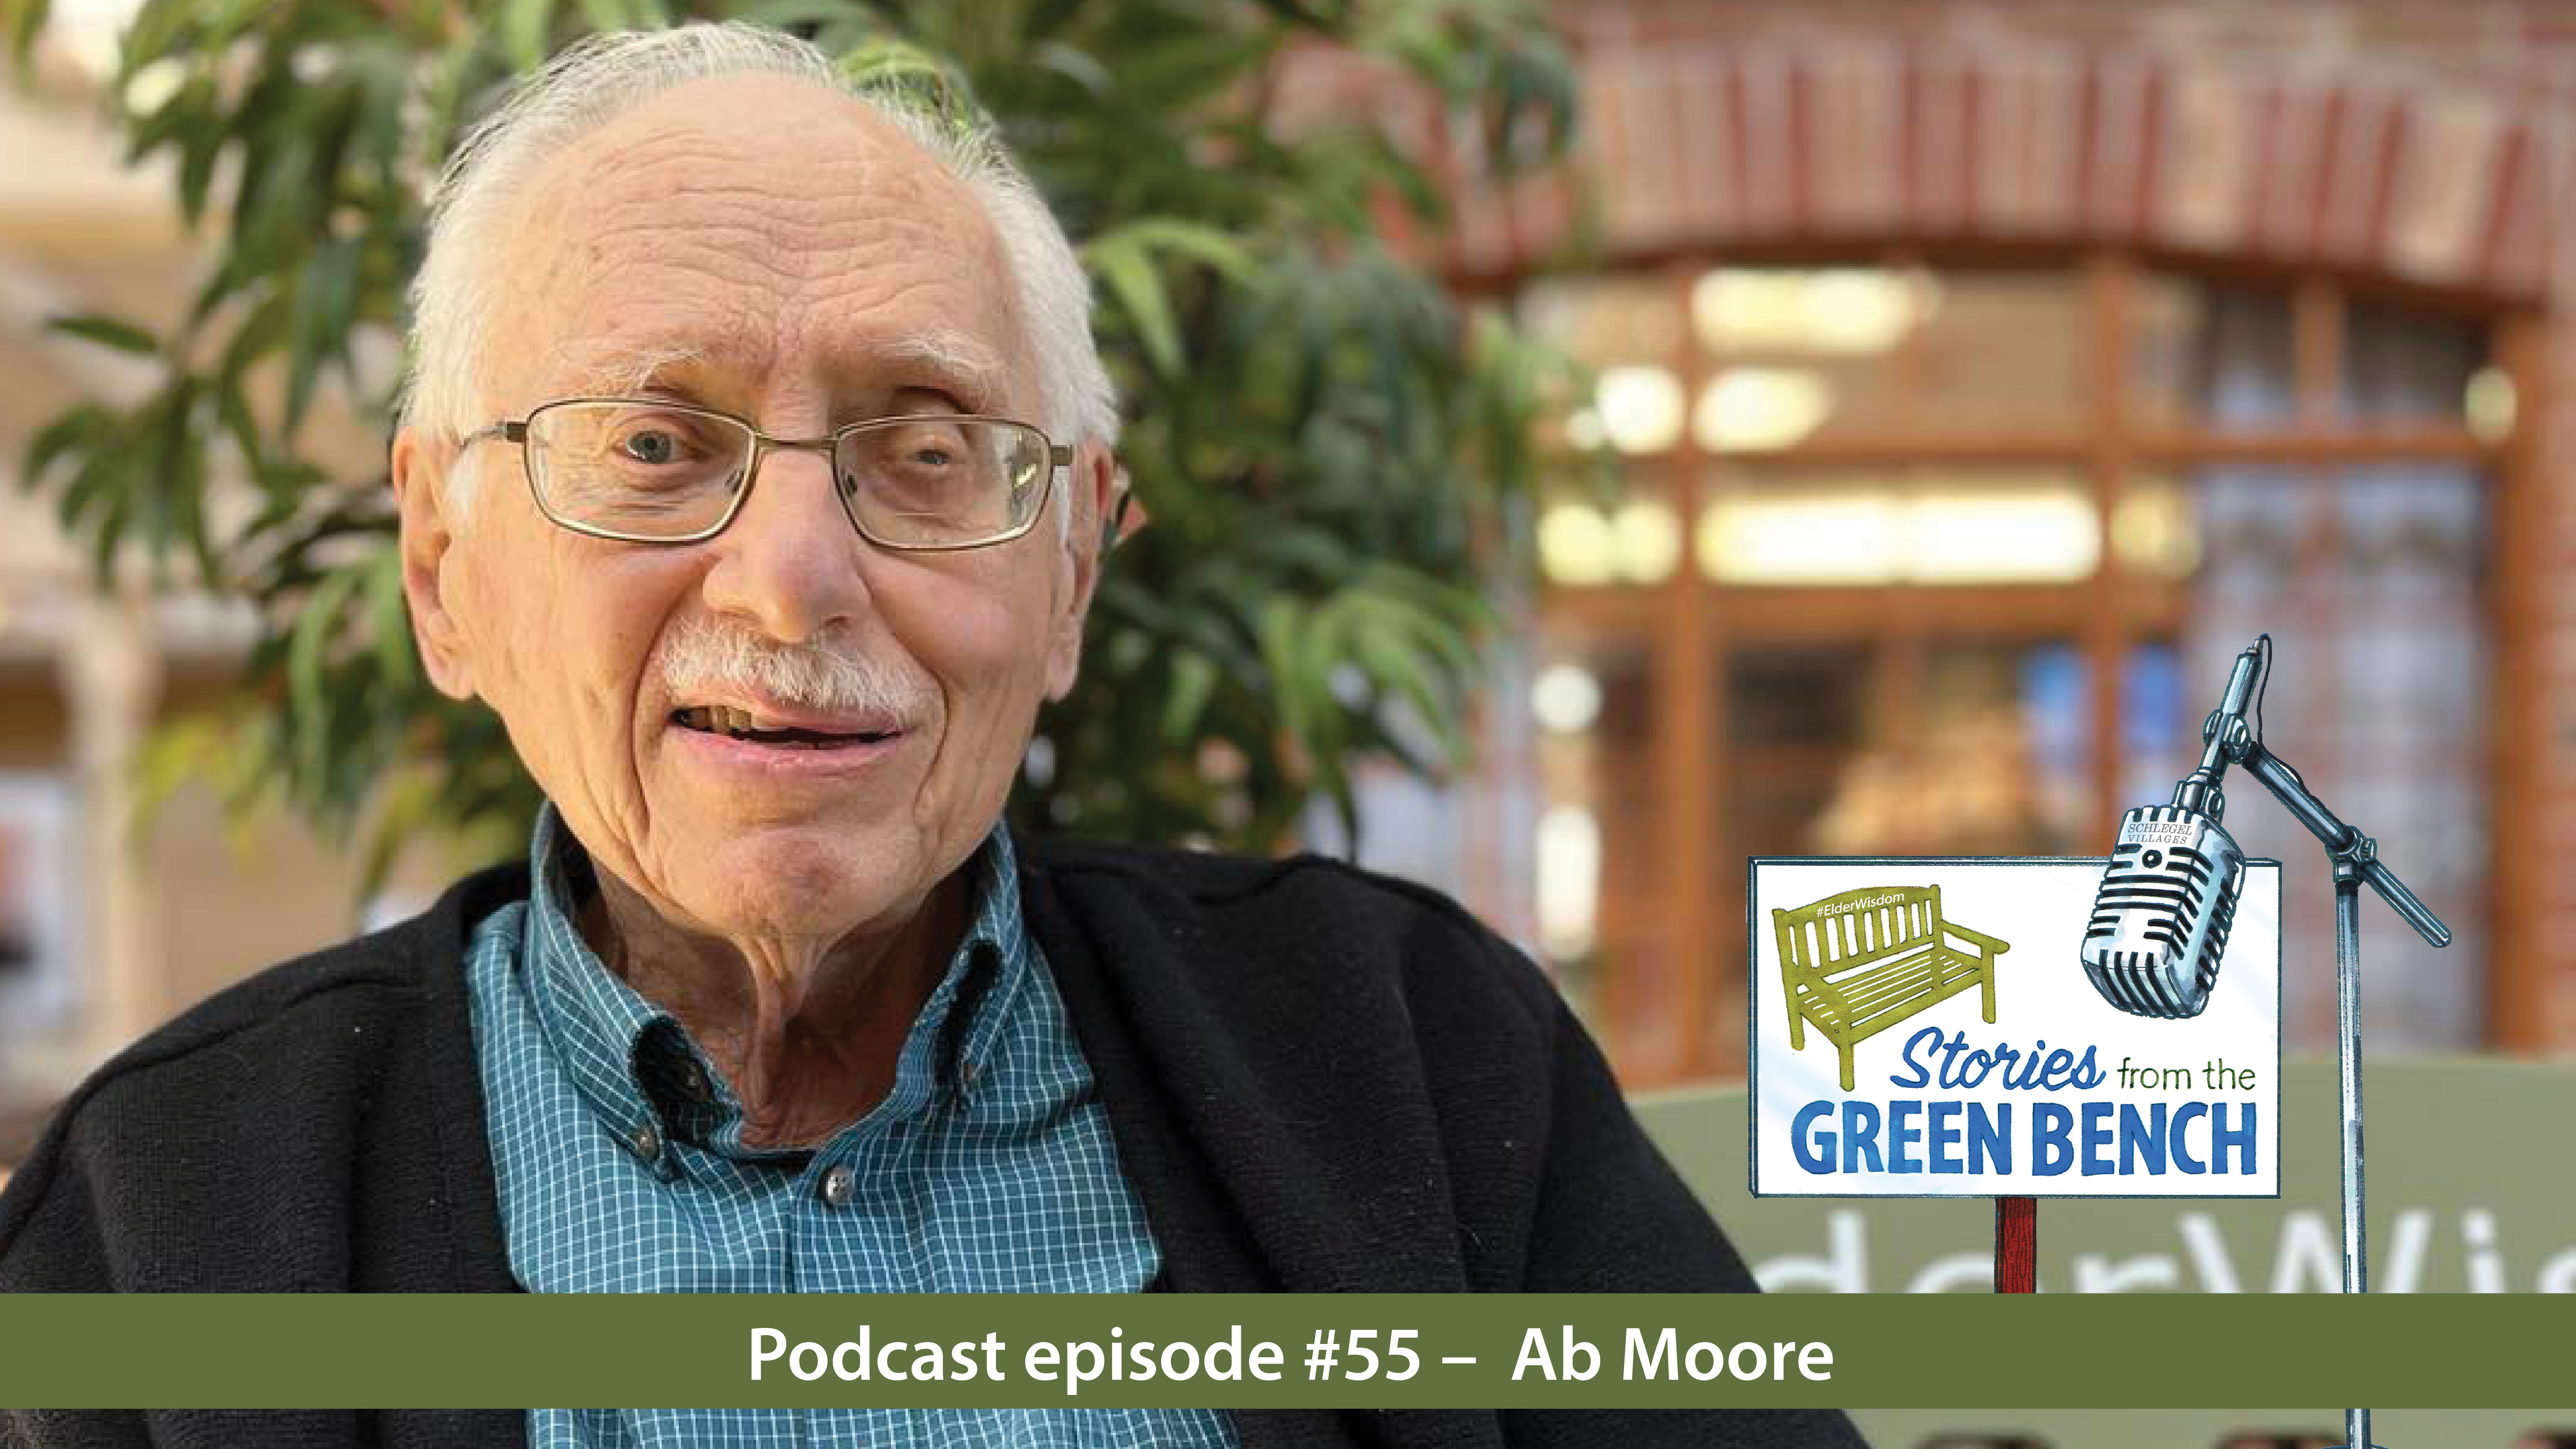 Ab Moore shares his story from the green bench on the #ElderWisdom podcast